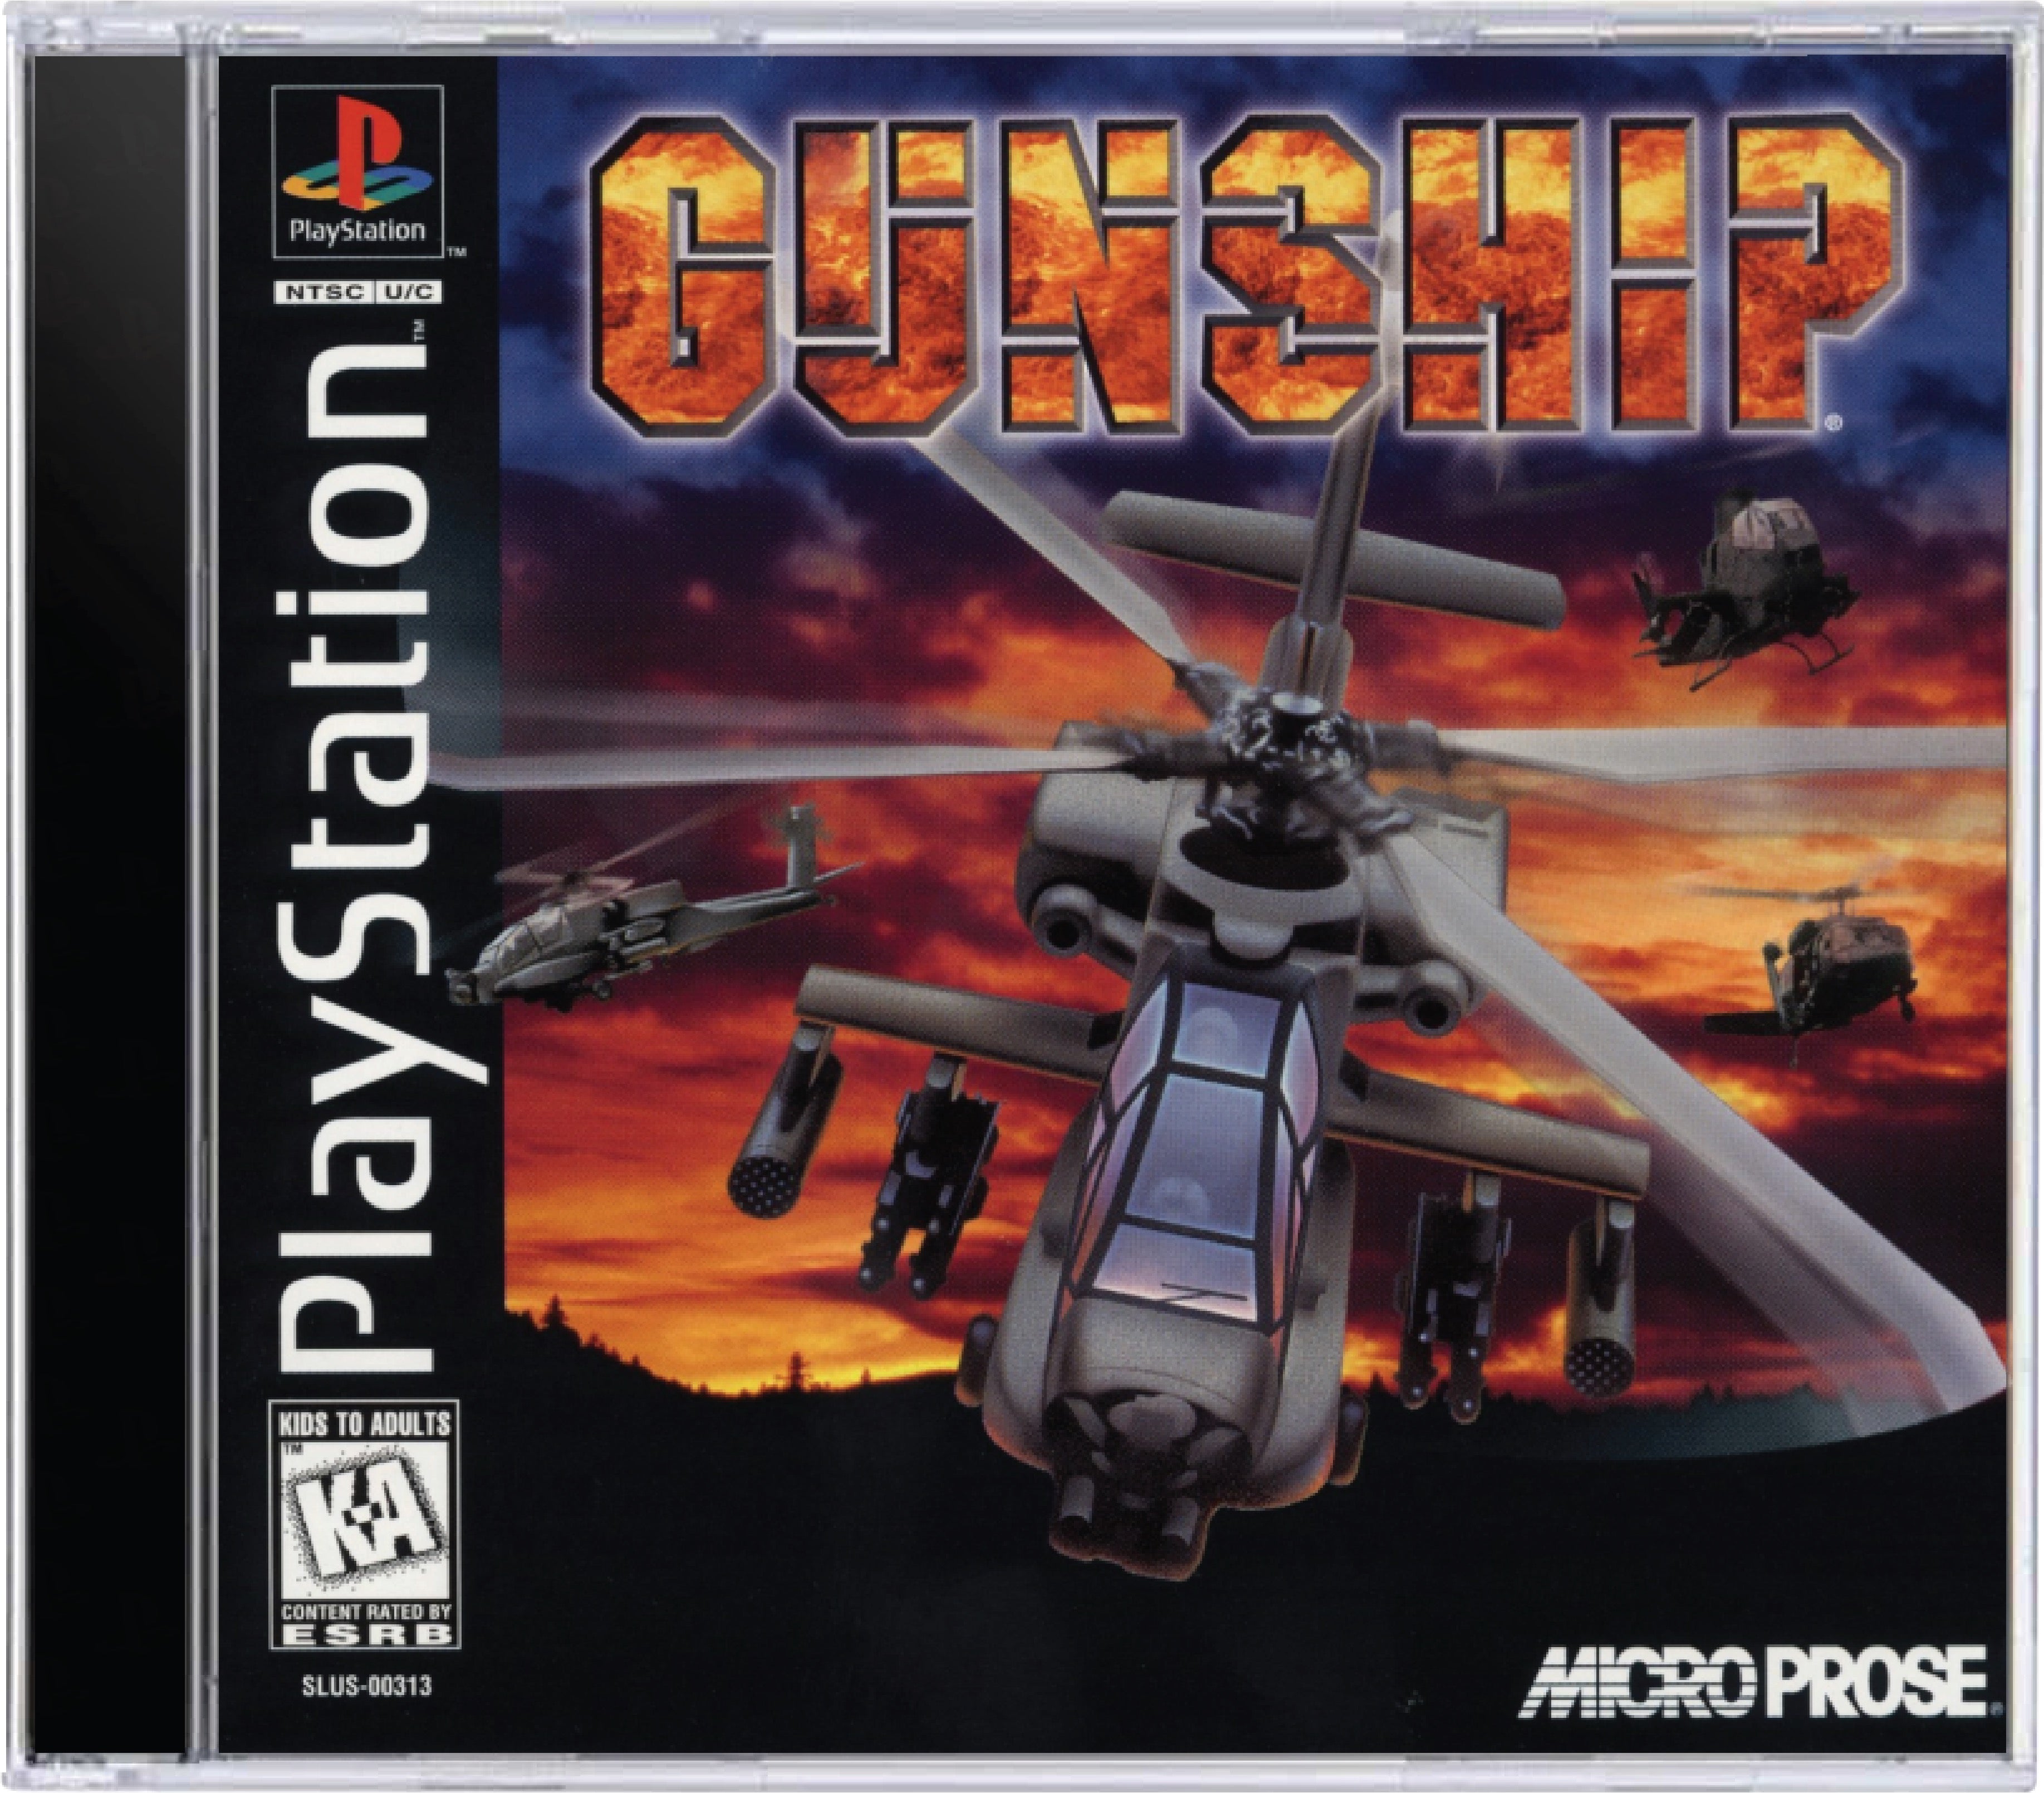 Gunship Cover Art and Product Photo